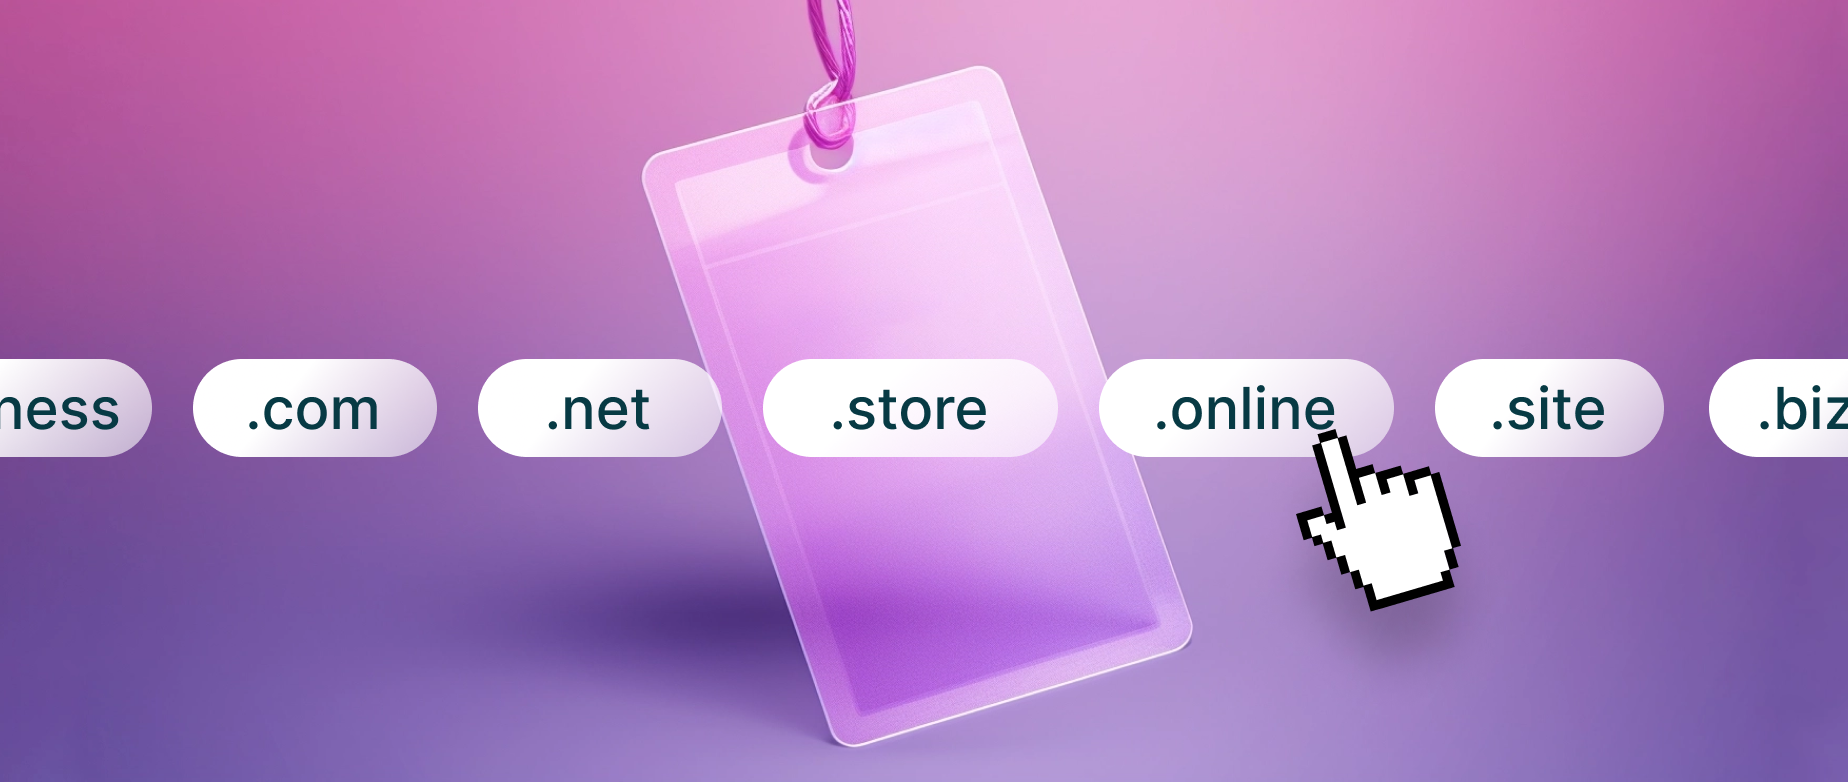 A price tag hangs behind popular domain extensions, representing the idea of domain prices.